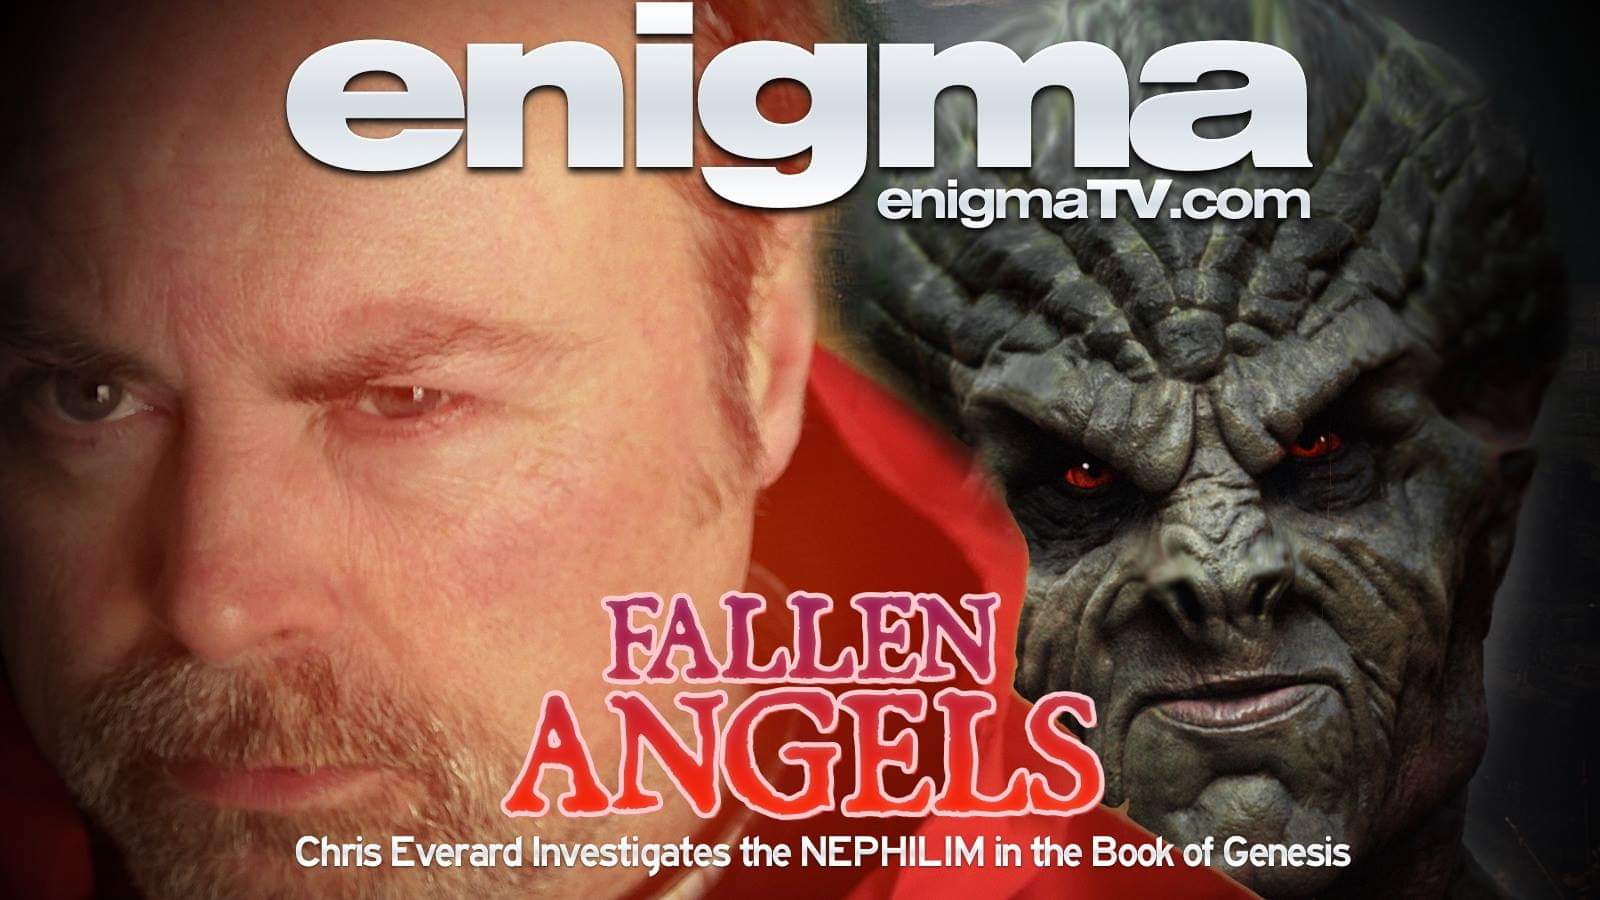 Did angels have sexual intercourse with women and thereby produce giants? ARCHAEOLOGICAL EVIDENCE of the Nephilim in the Book of Genesis is investigated in the FALLEN ANGELS mini-series on The Enigma Channel here https://EnigmaChannel.com - This four-part series travels the globe to bring you proof of the Nephilim - strange elongated skulls, evidence of cannibalism in ancient Israel and the roots of the Kabbalah are all explored in this documentary TV series.